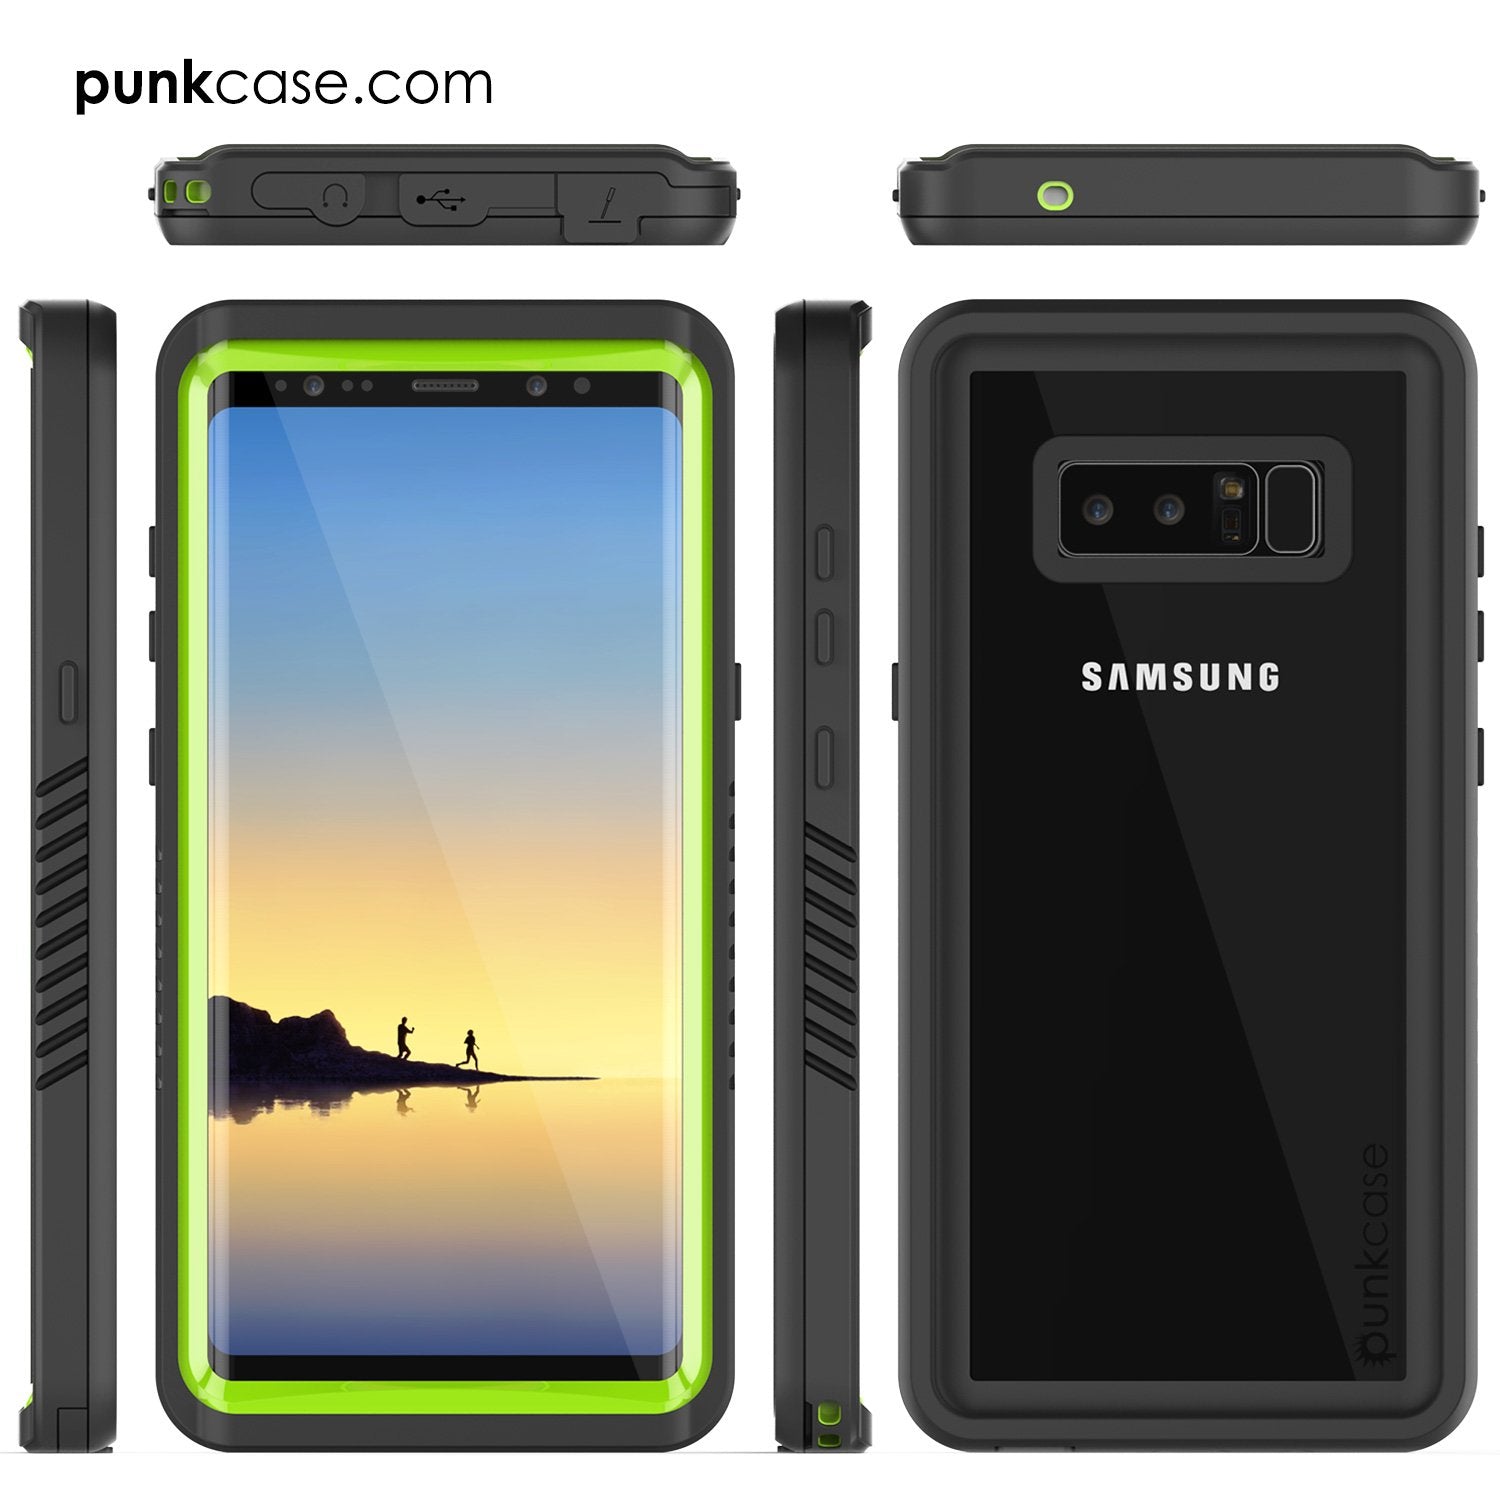 Galaxy Note 8 Case, Punkcase [Extreme Series] [Slim Fit] [IP68 Certified] [Shockproof] Armor Cover W/ Built In Screen Protector [Light Green]